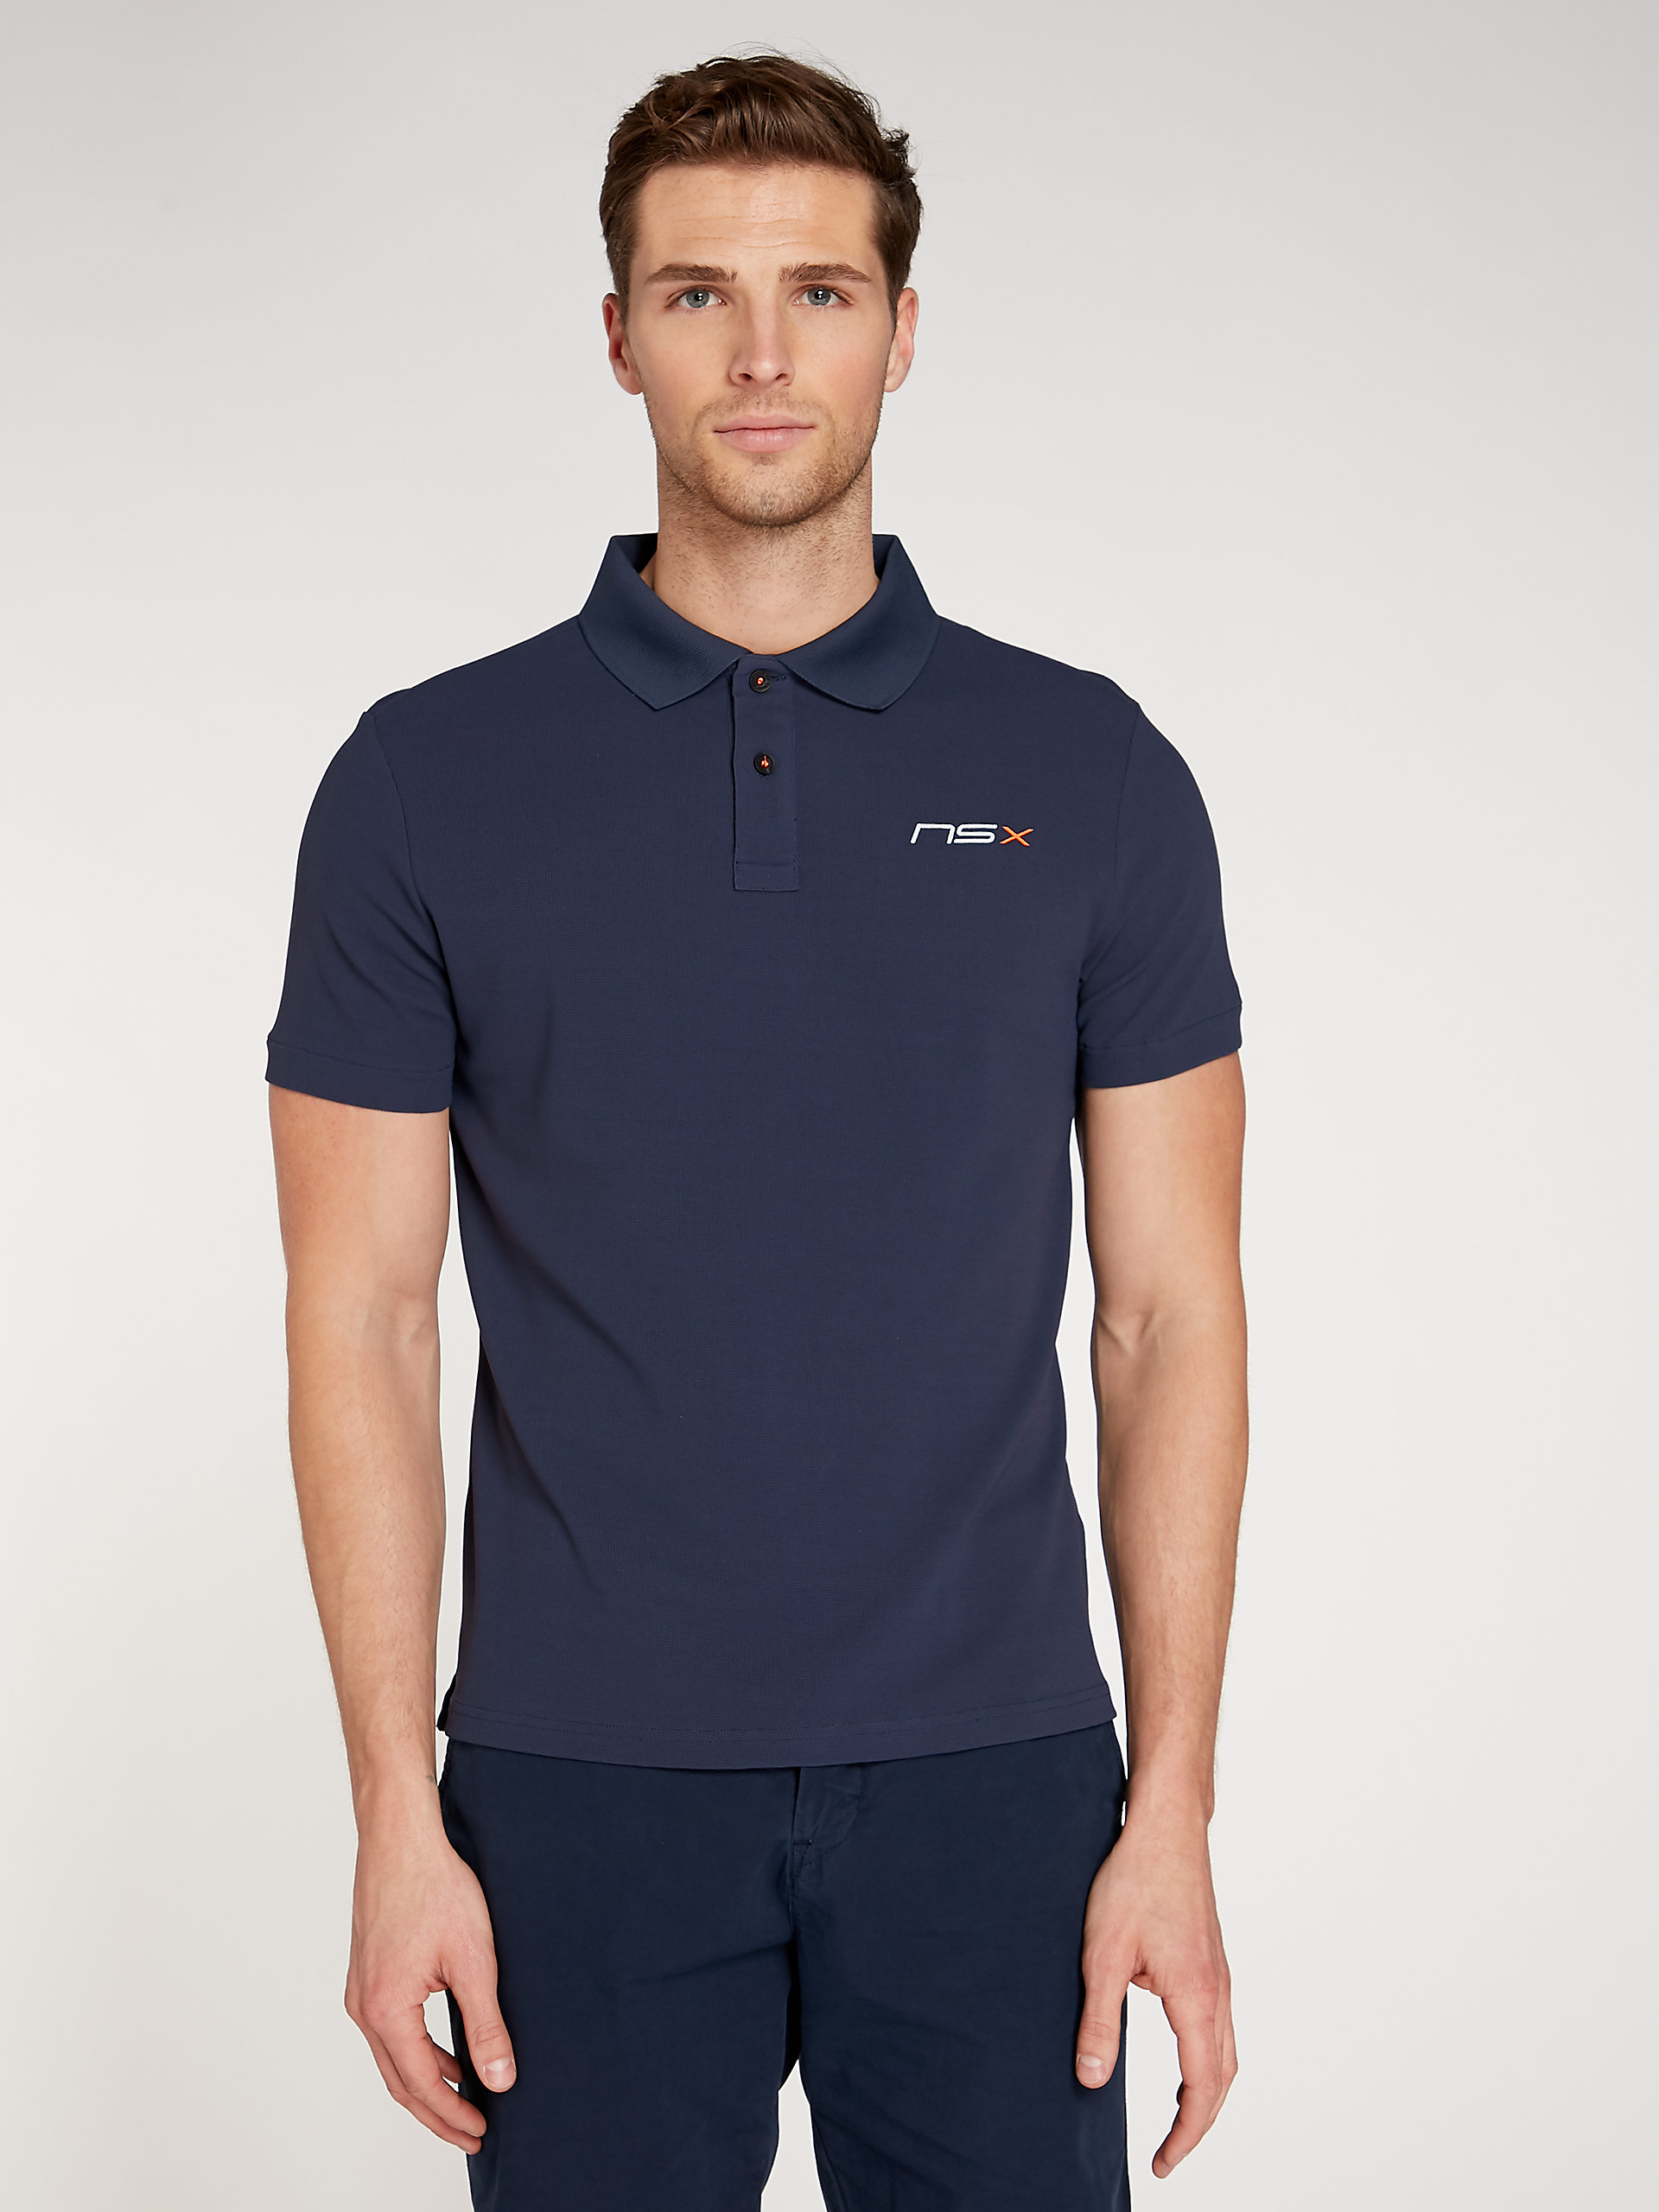 Tactel Performance Polo Slim | North Sails Collection